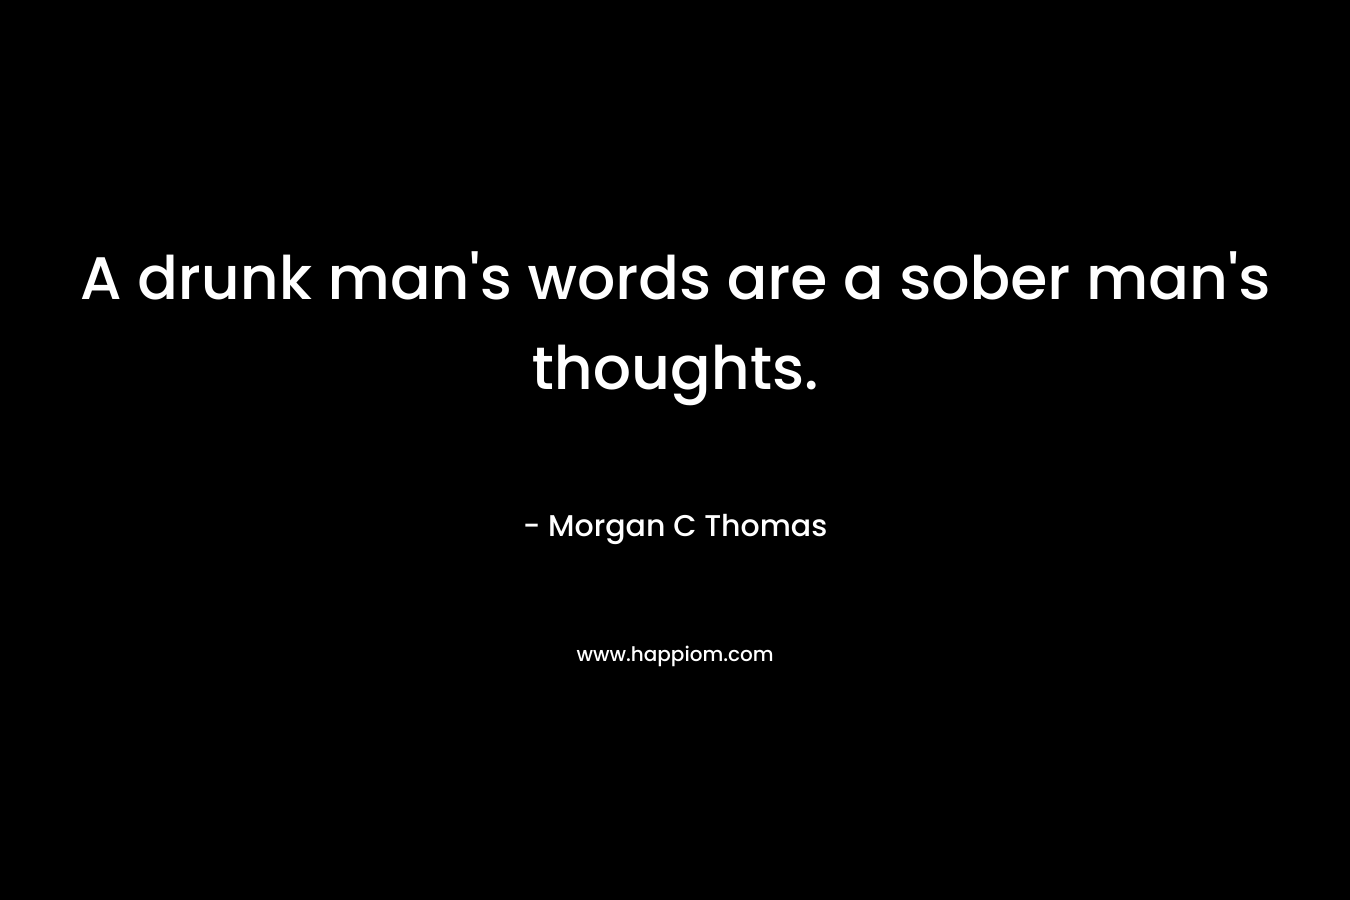 A drunk man’s words are a sober man’s thoughts. – Morgan C Thomas